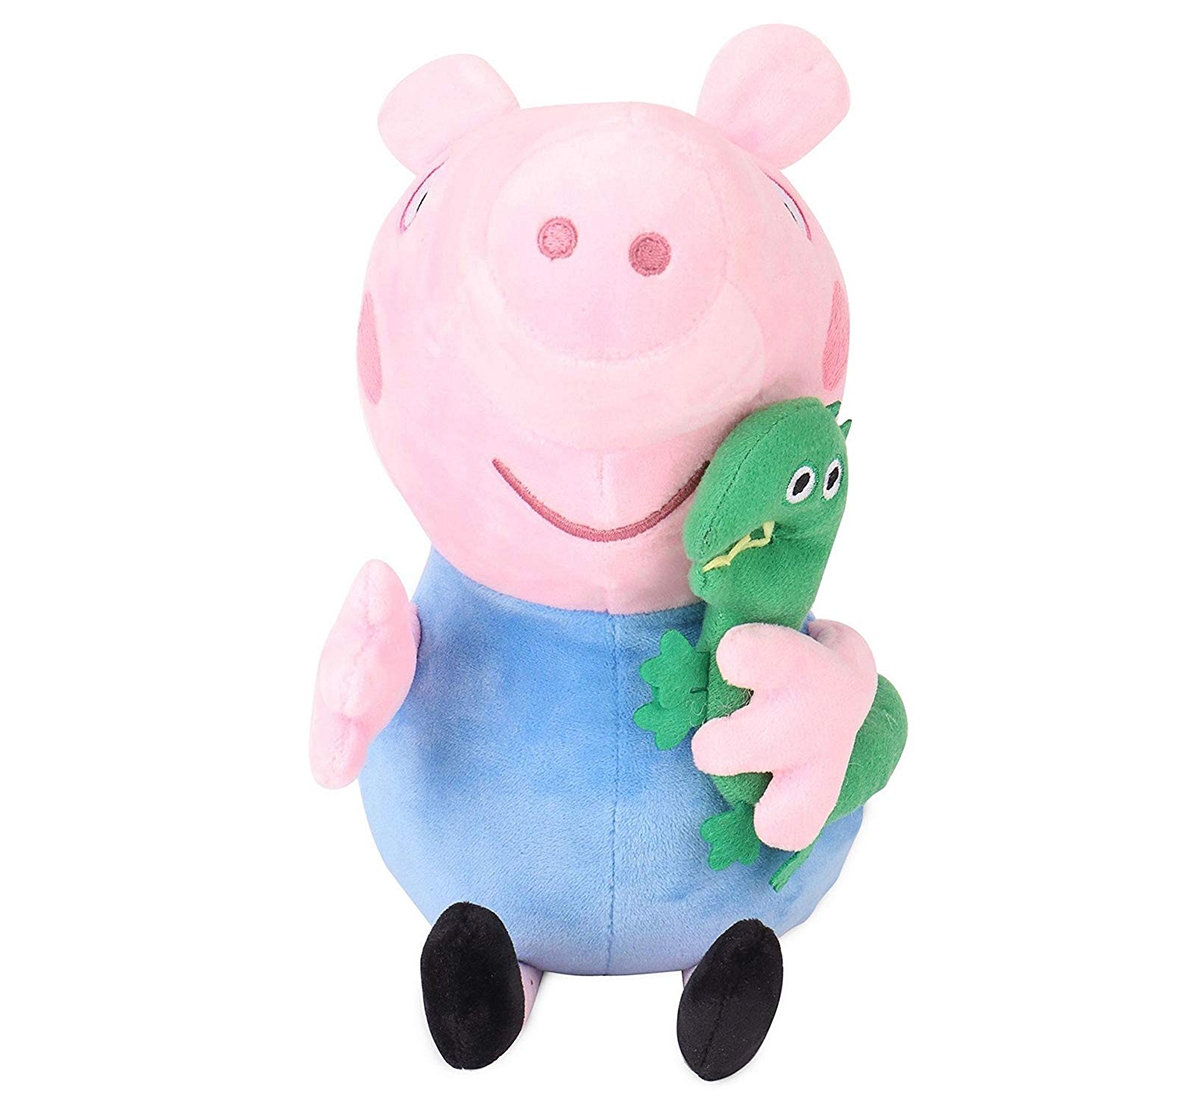 Peppa Pig | Peppa George Pig with Dinosaur 19 Cm  Soft Toy for Kids age 0M+ (Blue)